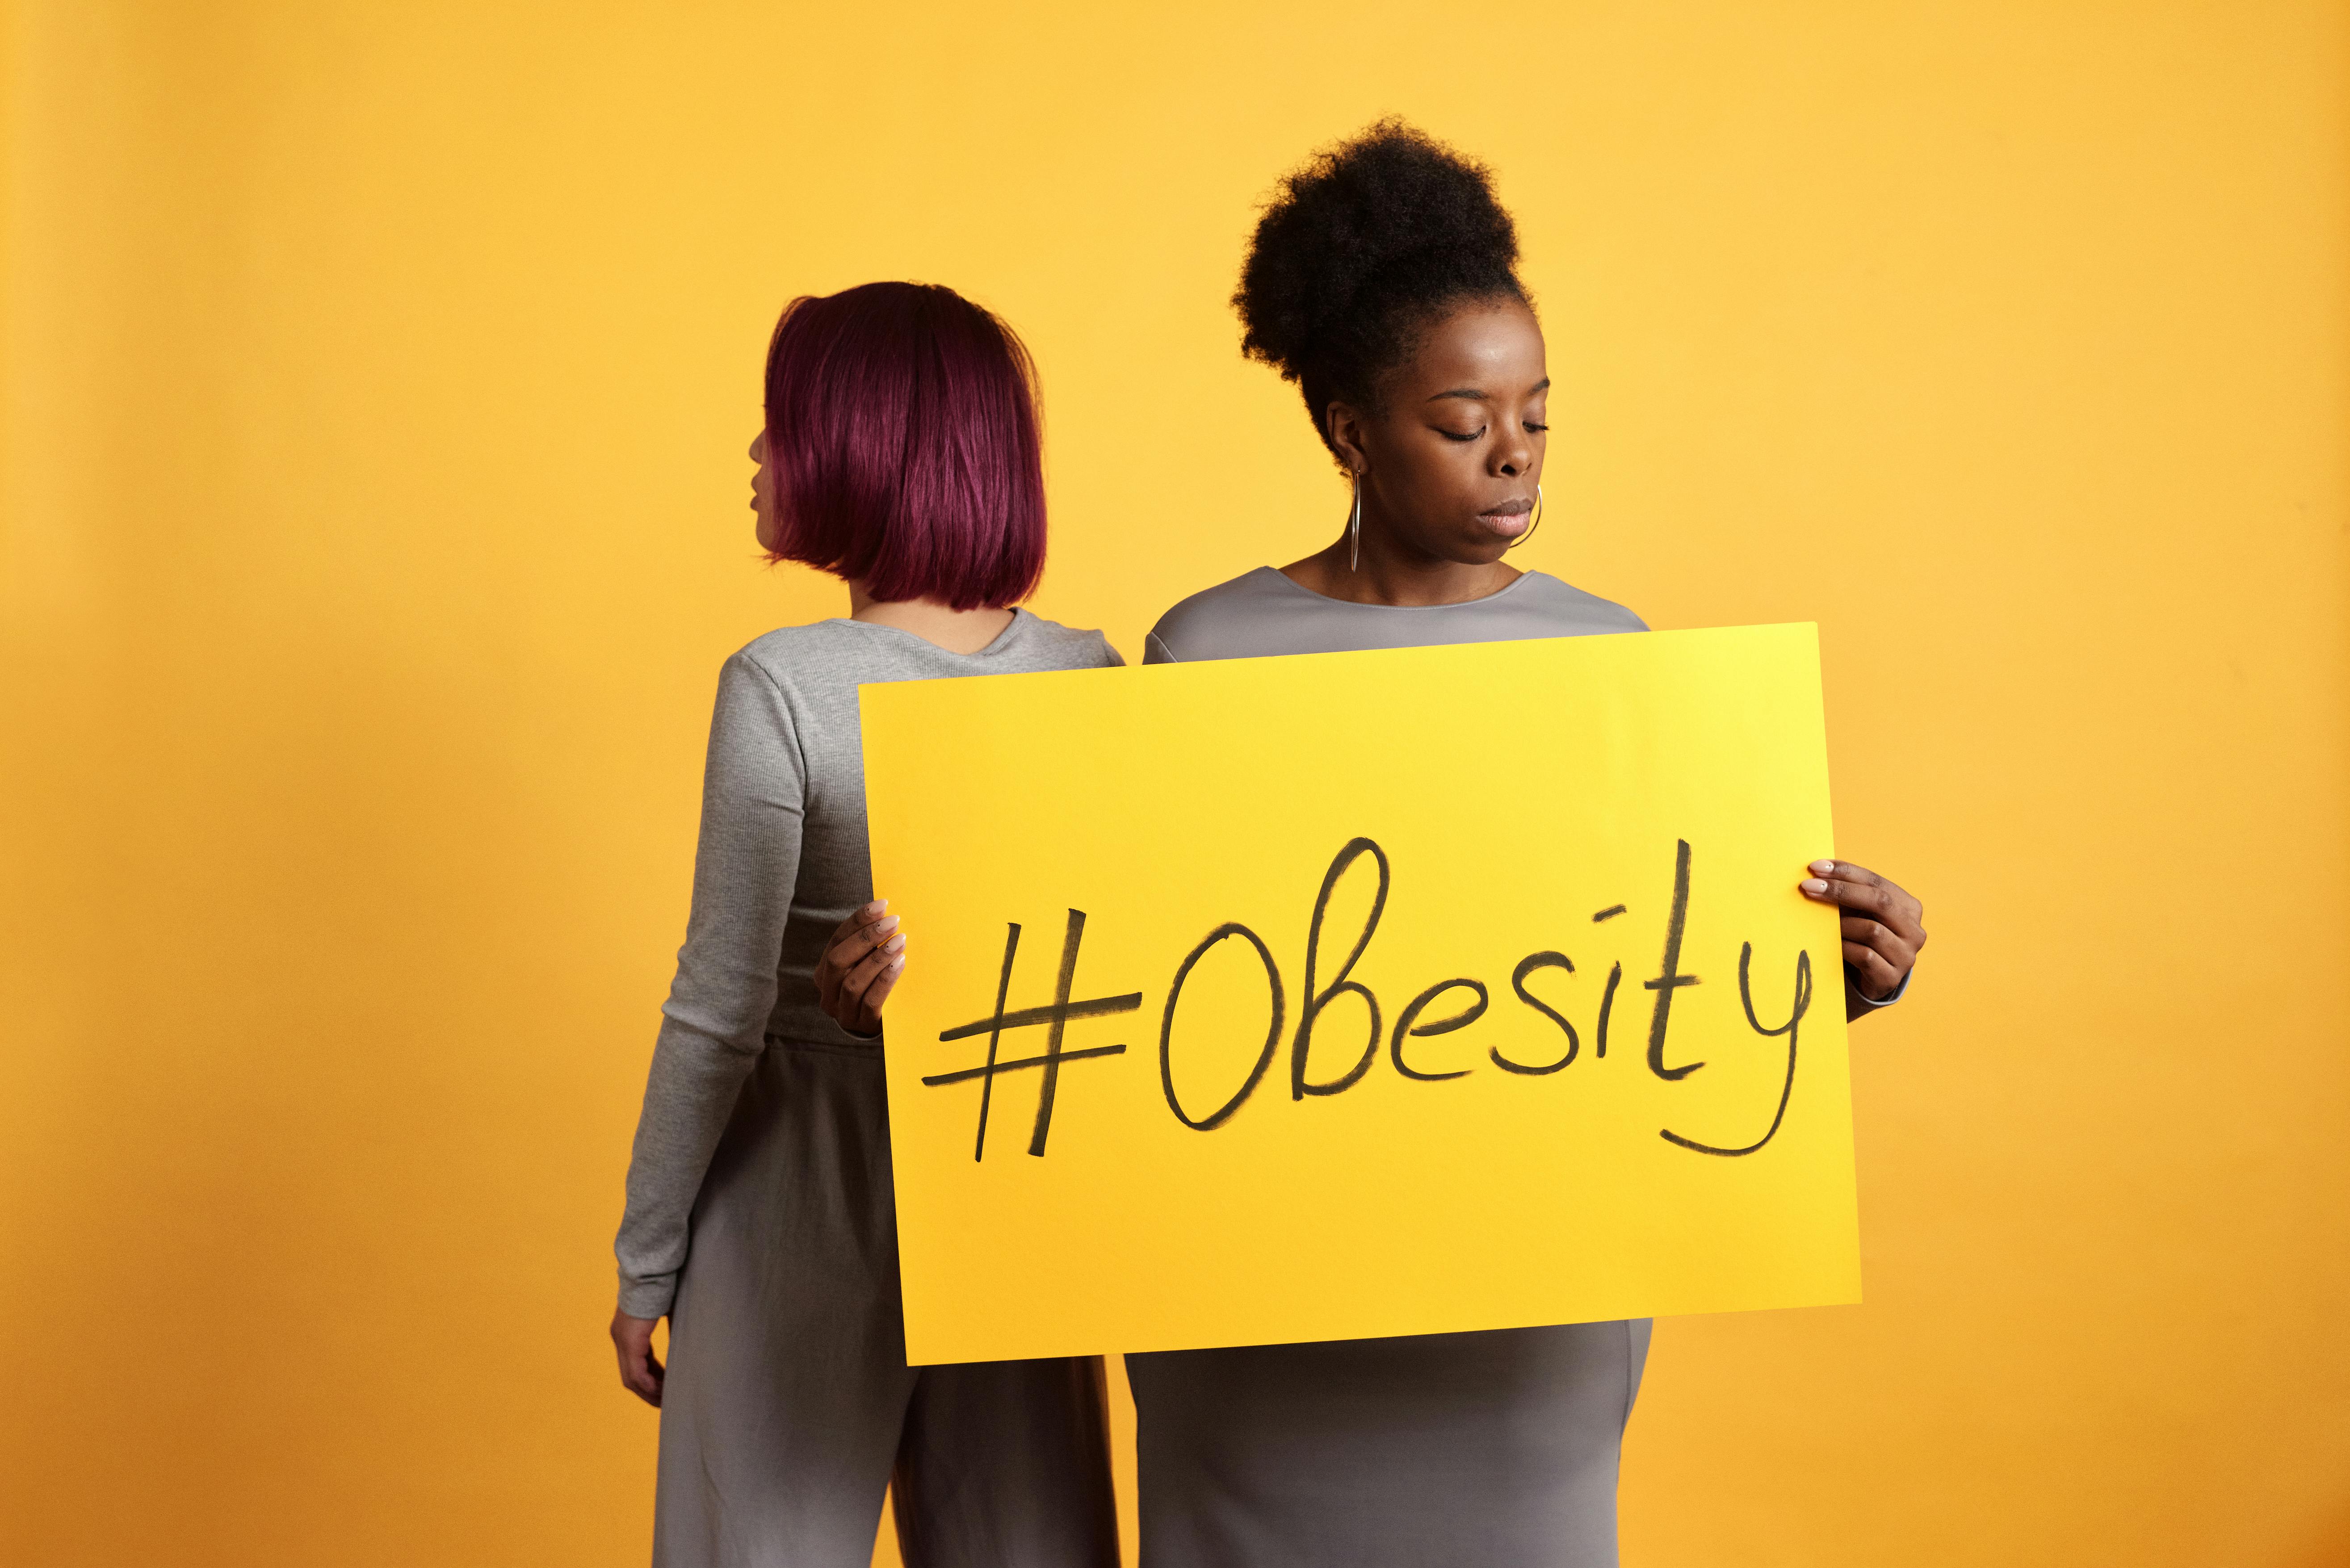 No such thing as healthy obesity research finds - BHF